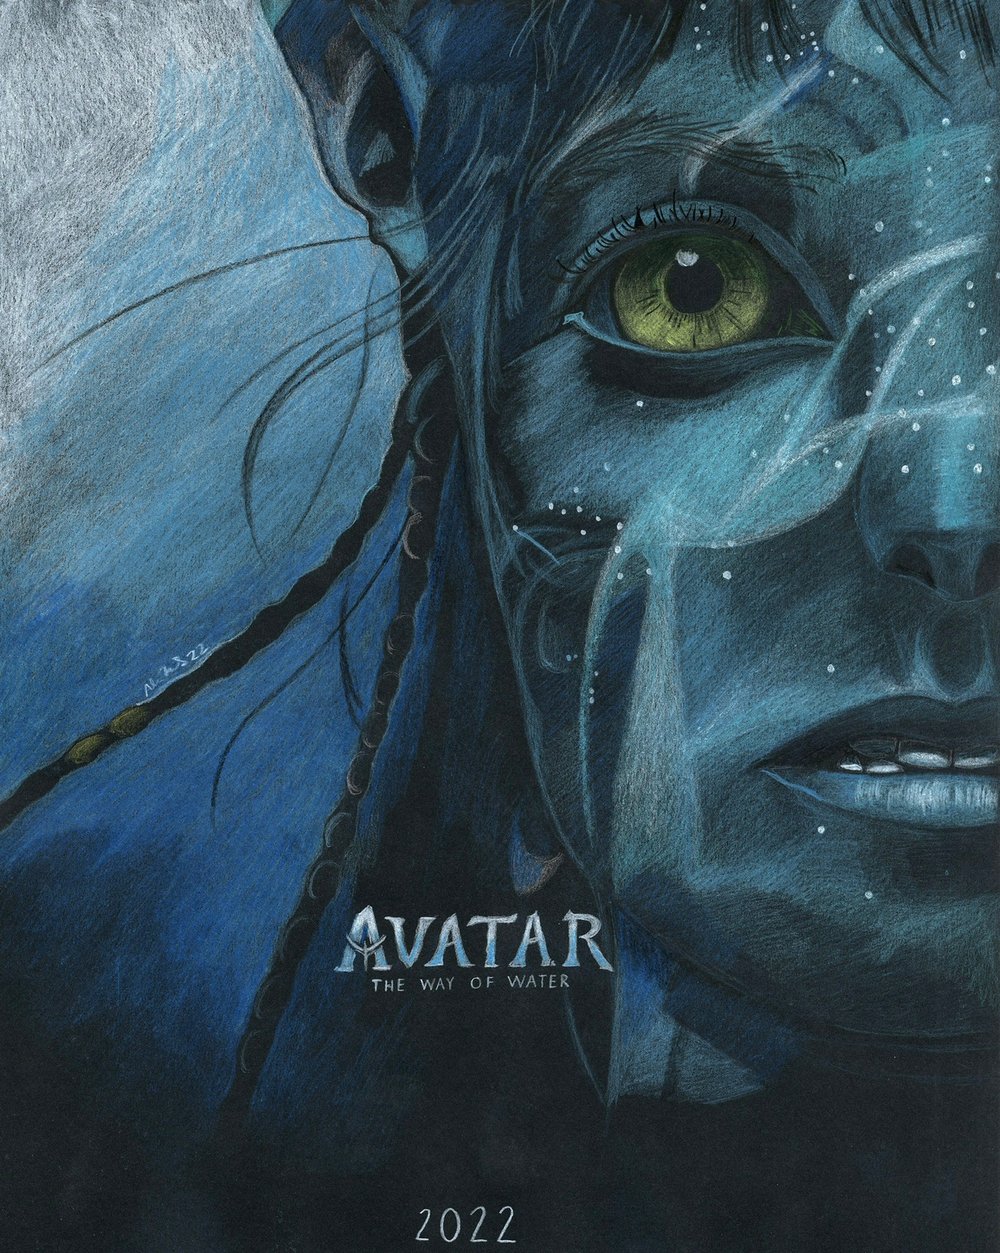 Image of “One life ends, another begins.” AVATAR: THE WAY OF WATER Art Print